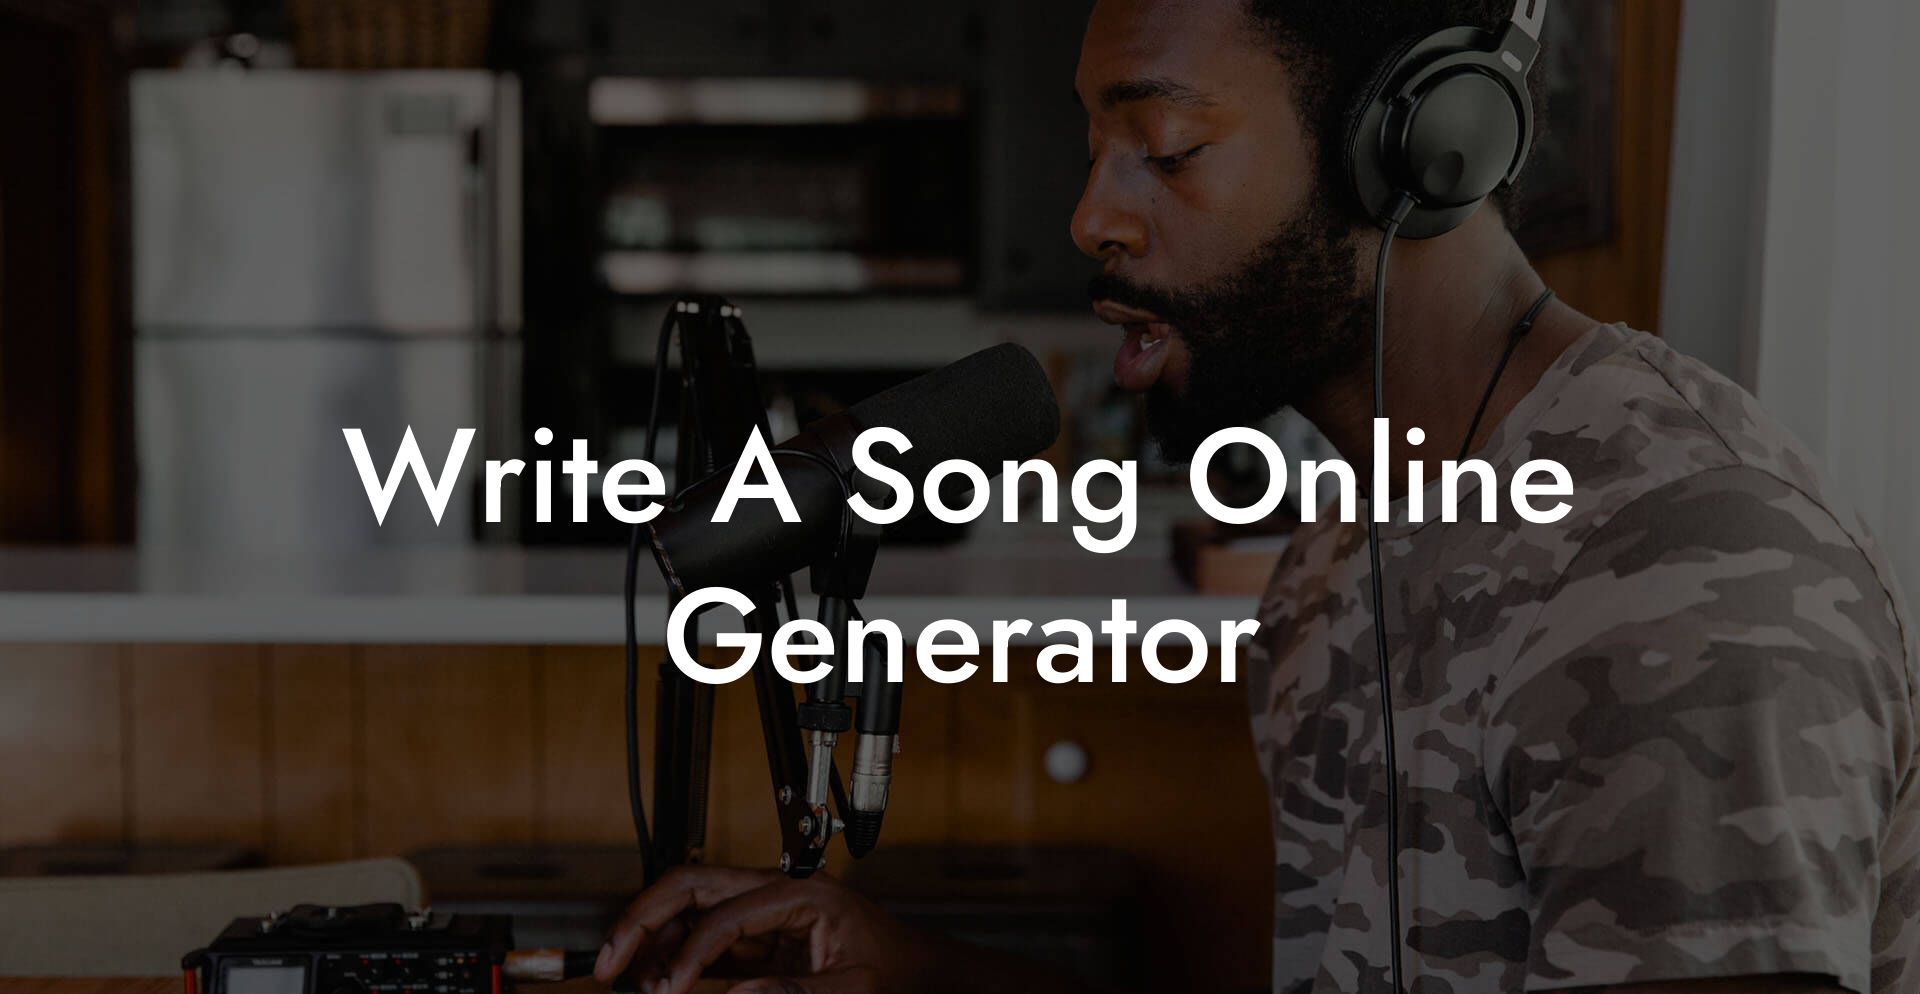 write a song online generator lyric assistant